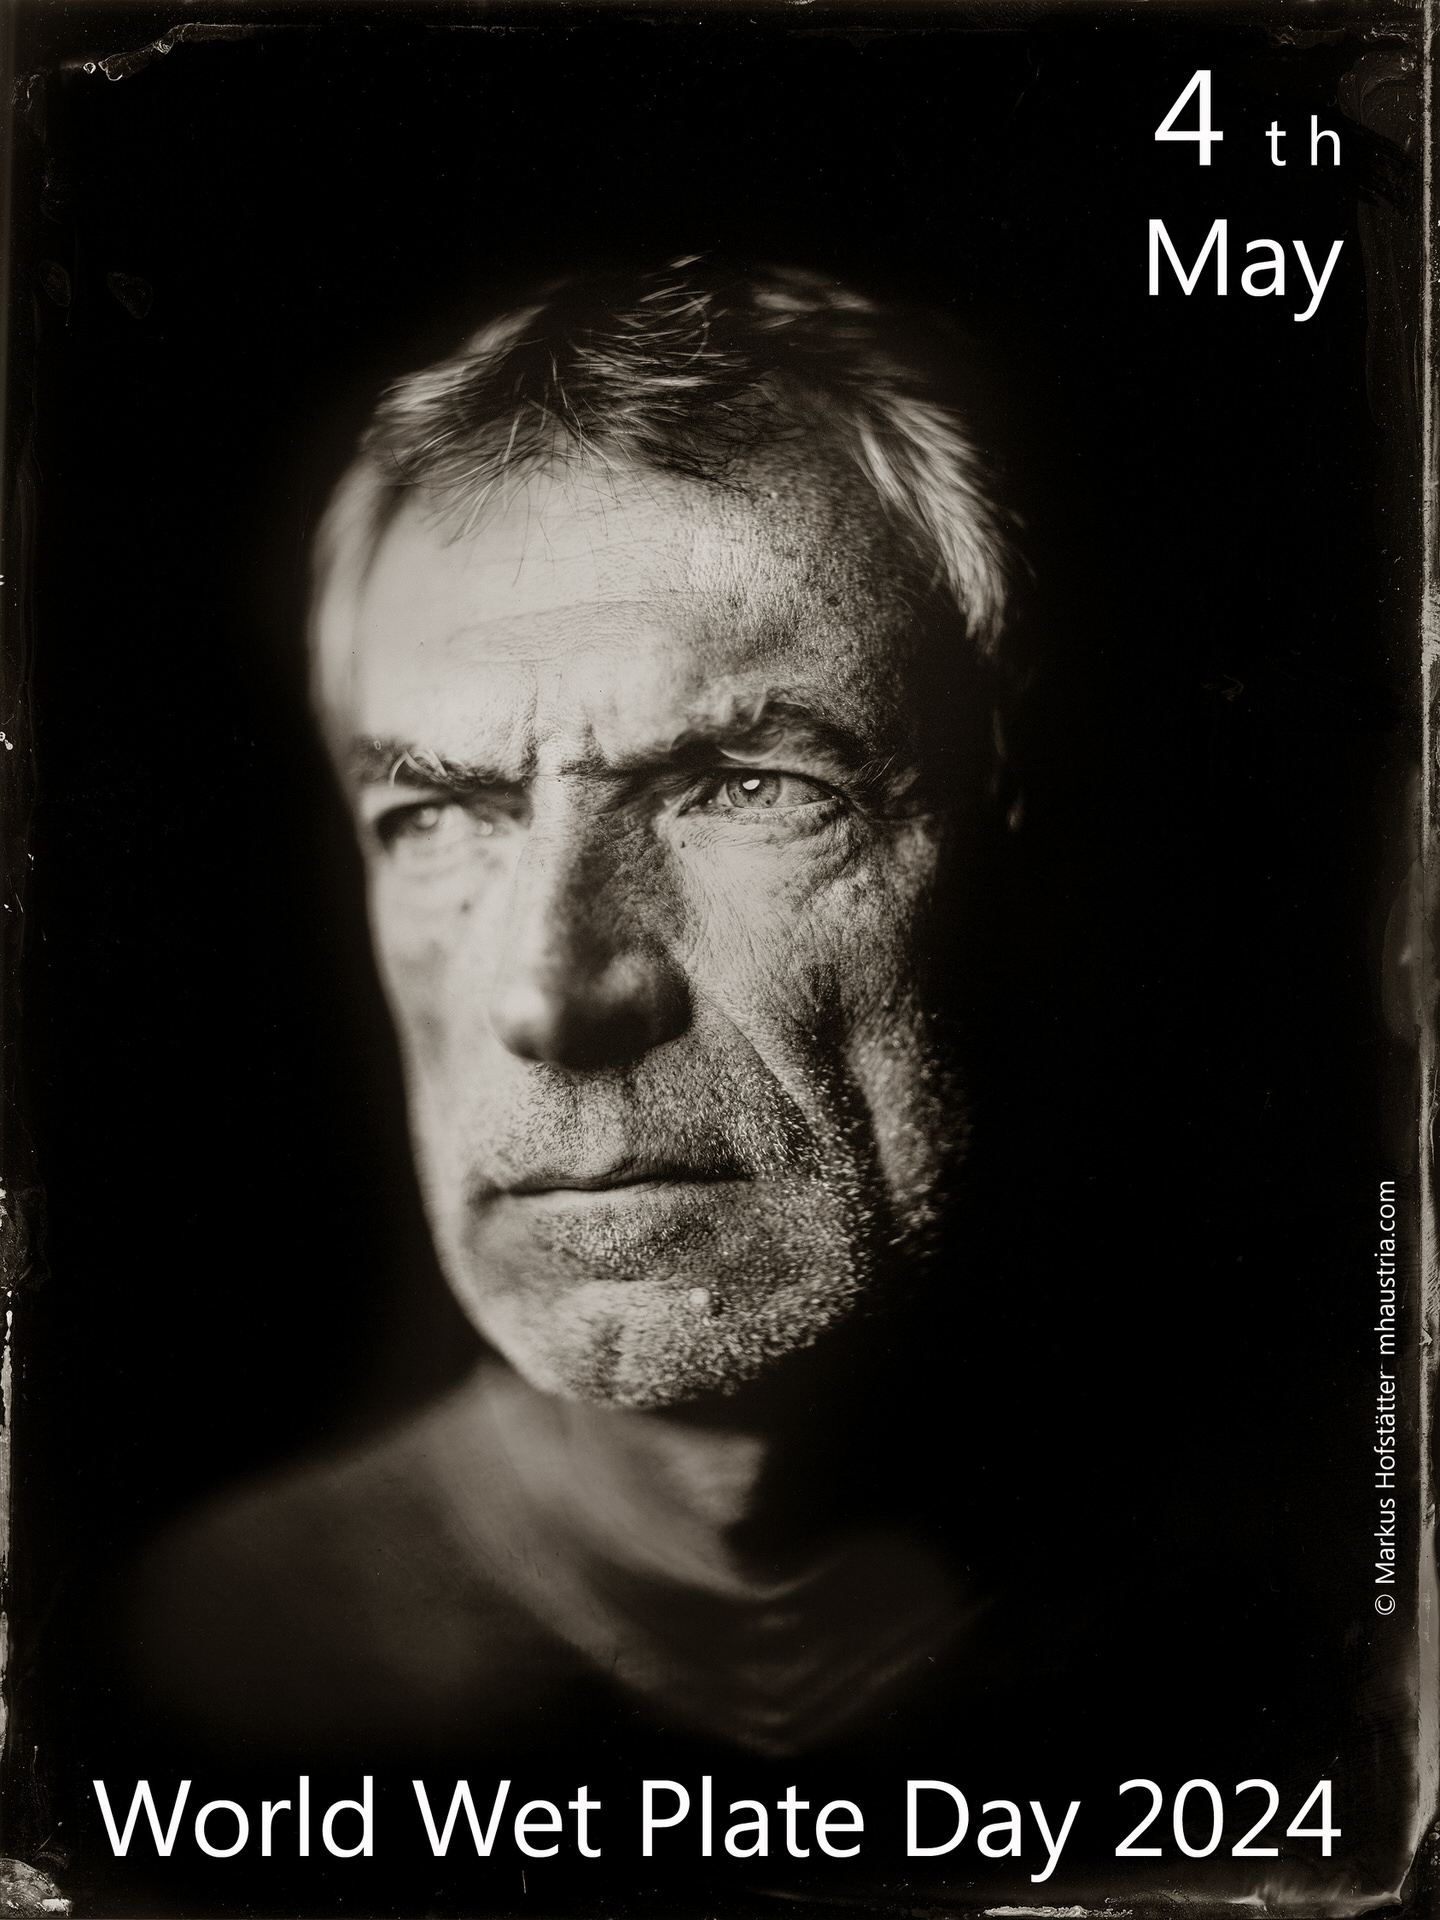 2024 World Wet Plate Day Official Poster Photo by_Markus_Hofstätter_mhaustria